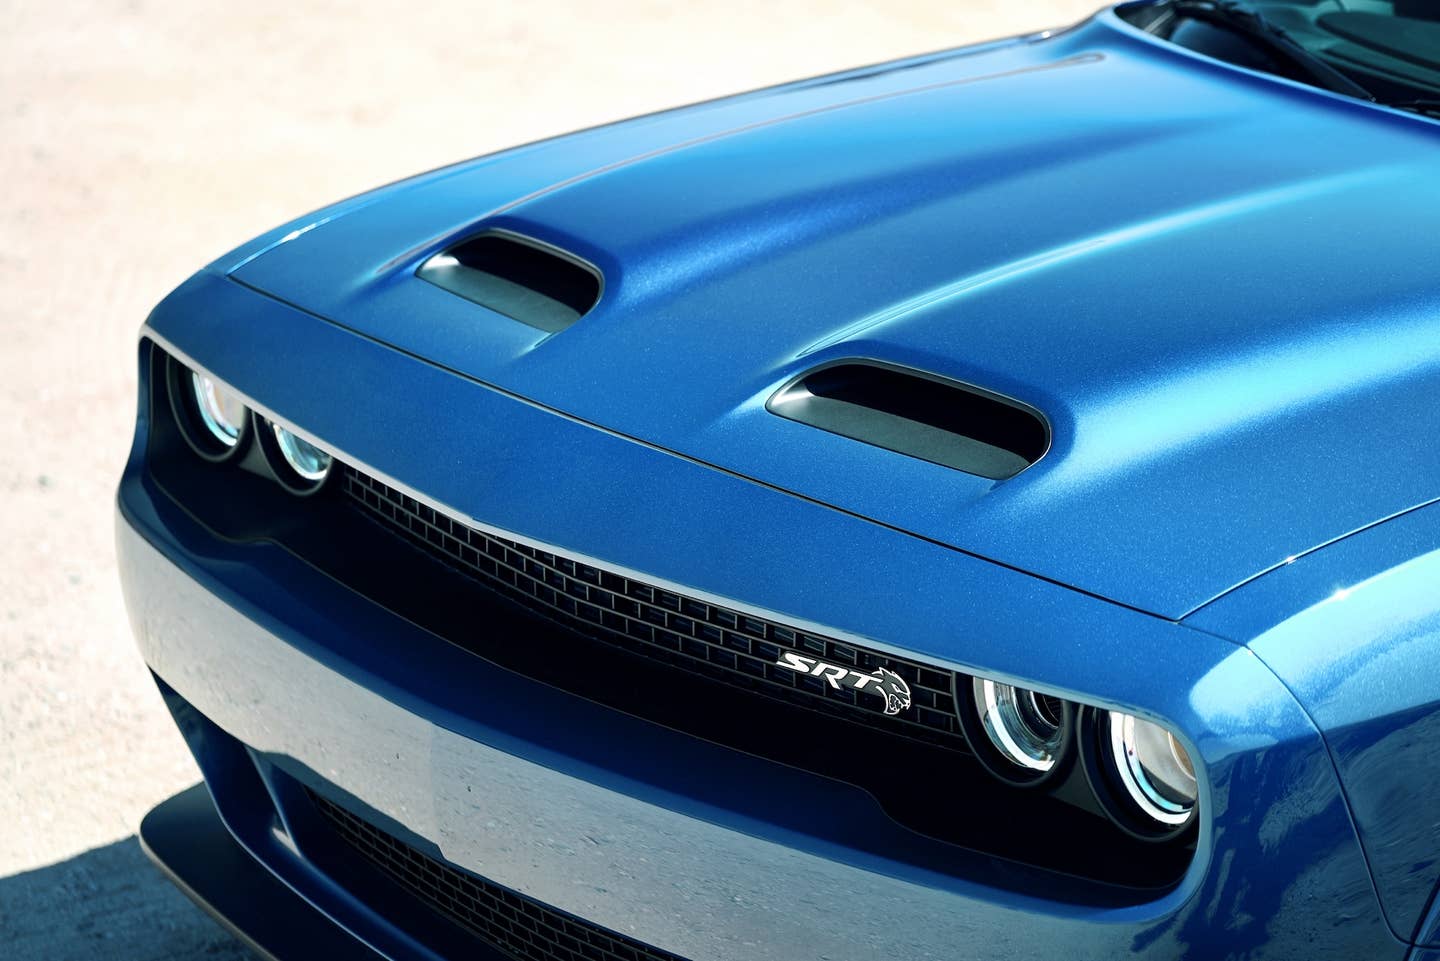 The 2023 Dodge Challenger SRT Hellcat Widebody, show in B5 Blue. Dodge brand will celebrate its 2023 model lineup through a  number of new initiatives, including by bringing back three beloved heritage exterior colors: B5 Blue, Plum Crazy purple and Sublime green. One popular modern color, Destroyer Grey, also returns to the fold.